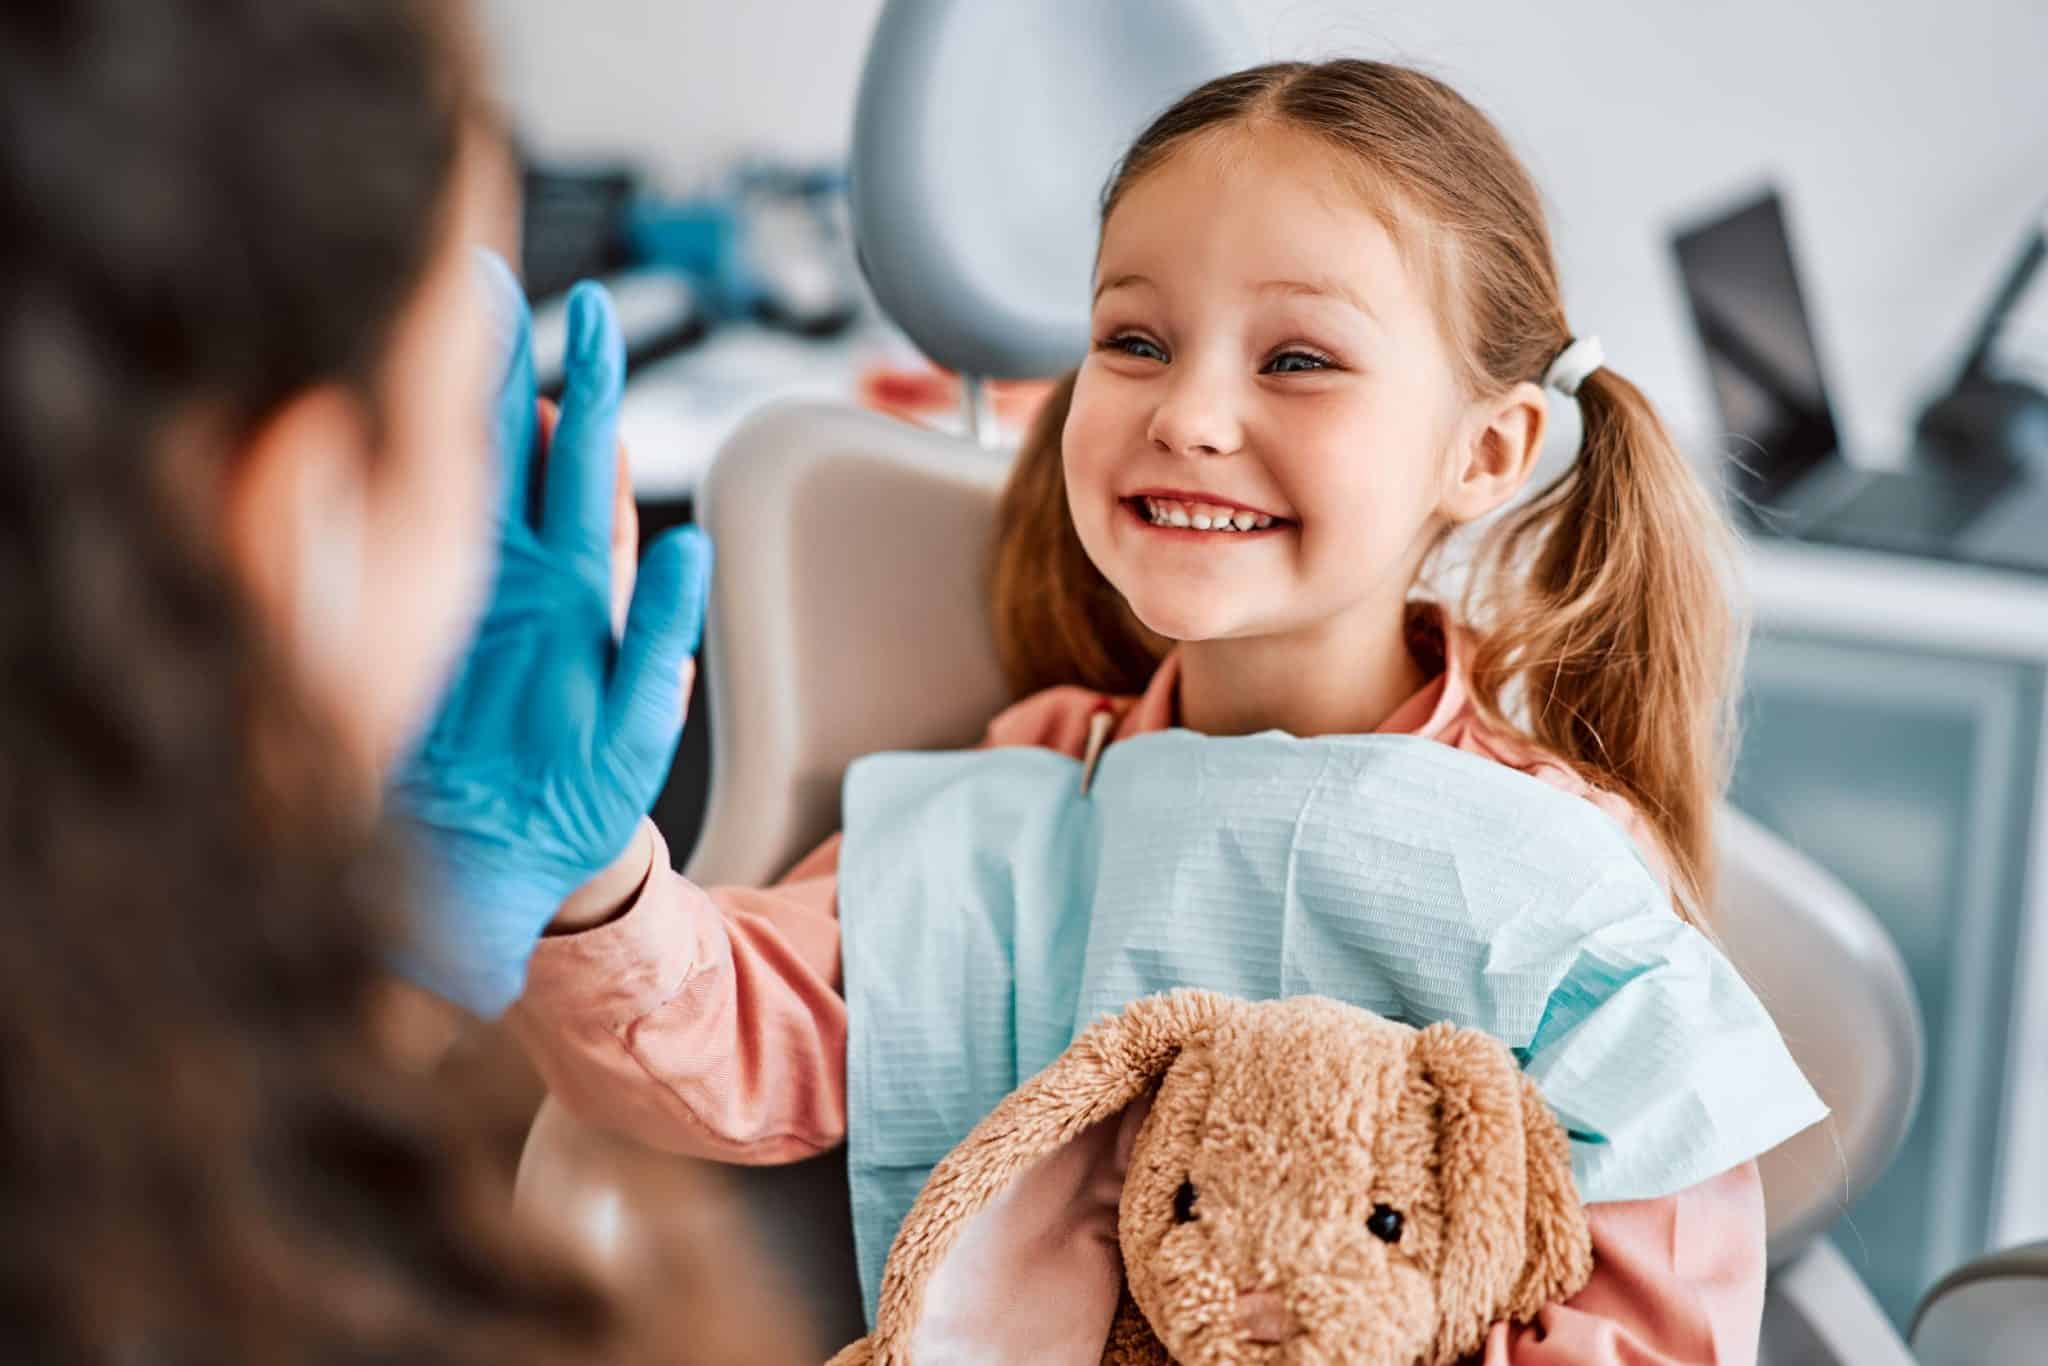 Dental Anxiety: Strategies for Overcoming Fear of the Dentist at My Kid’s Smile Pediatric Dentistry in Reno and Sparks, Nevada